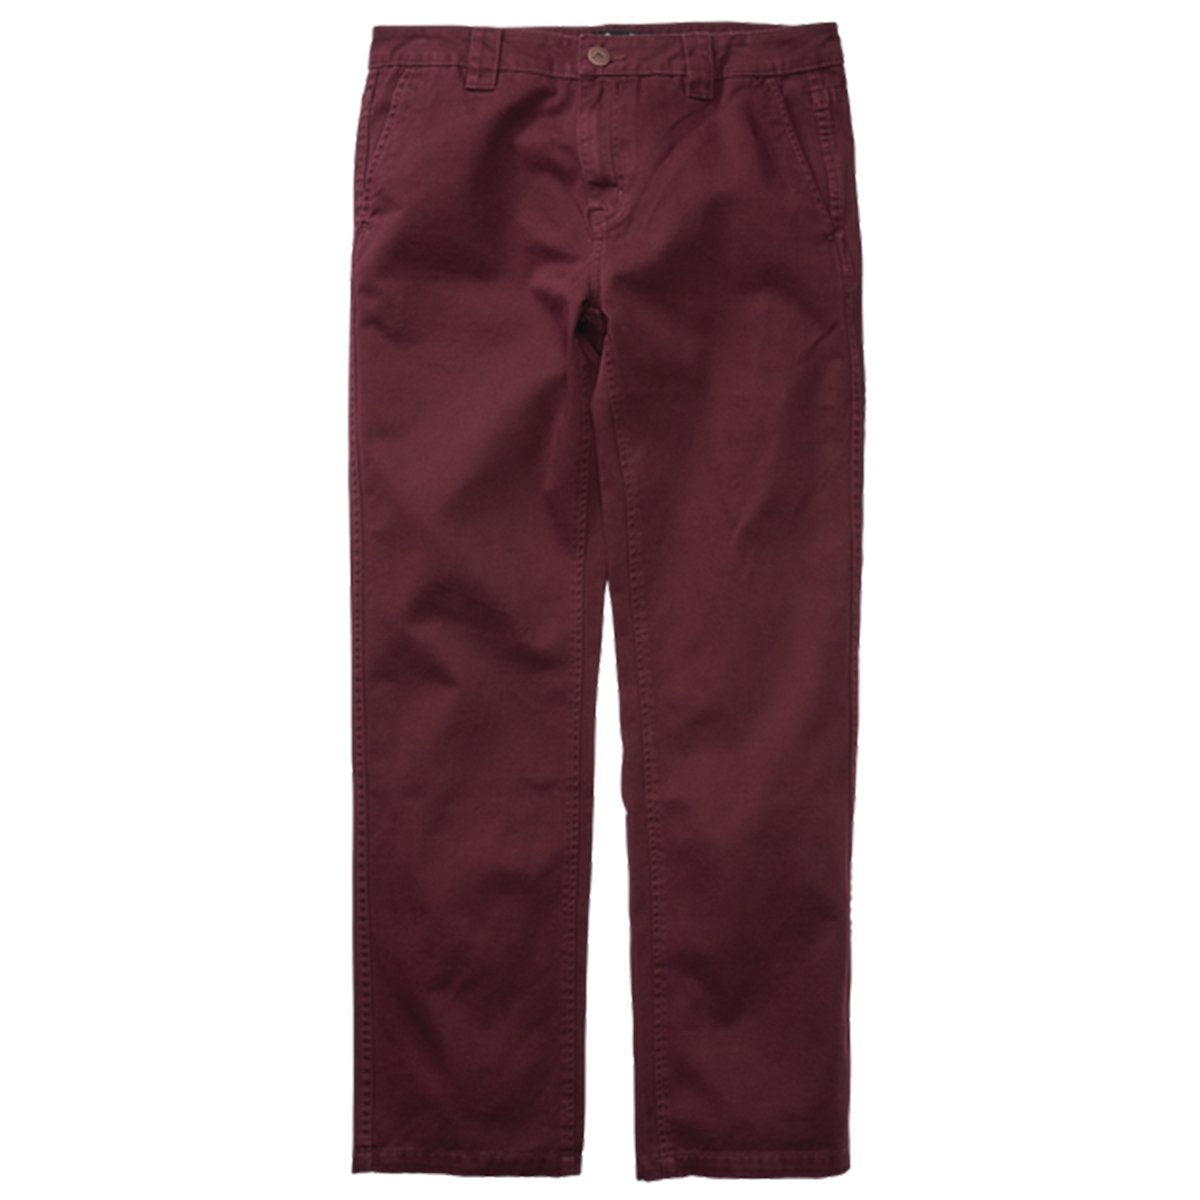 Defy Chino Pant Eggplant (size options listed)